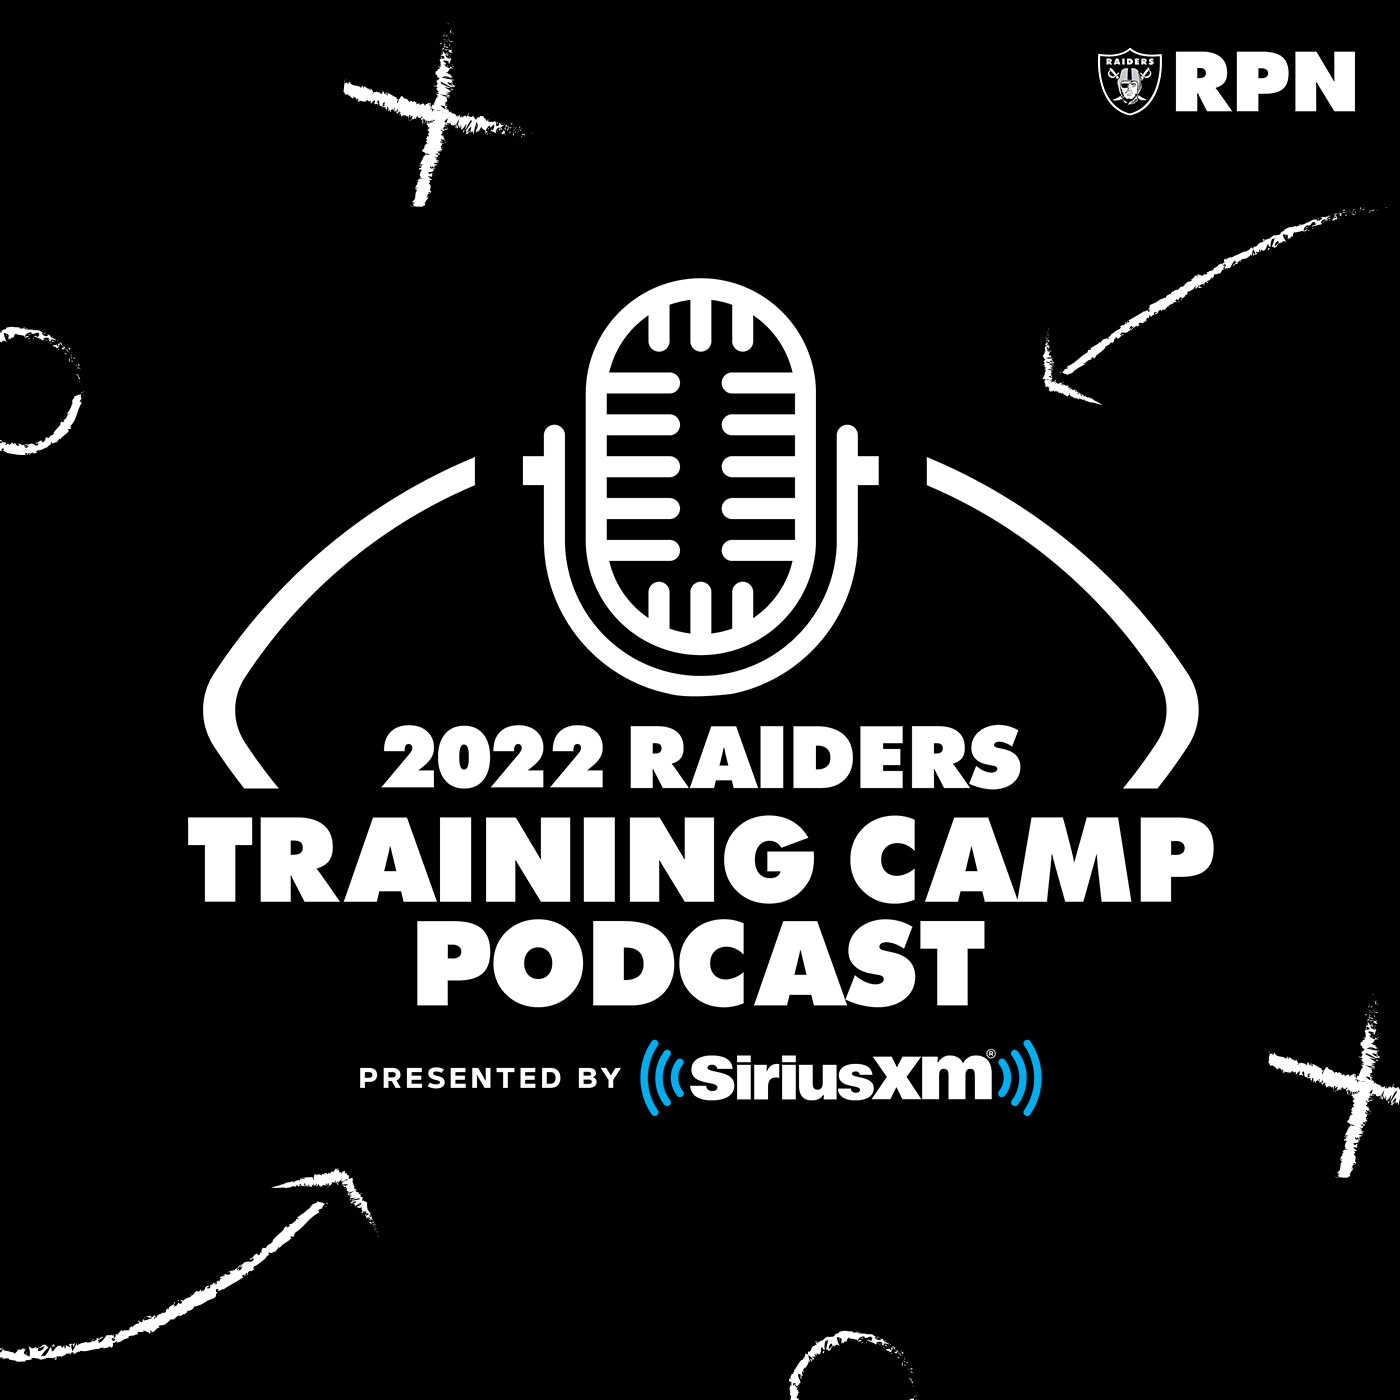 Final takeaways from 2022 Training Camp, plus storylines heading into the preseason finale against the Patriots